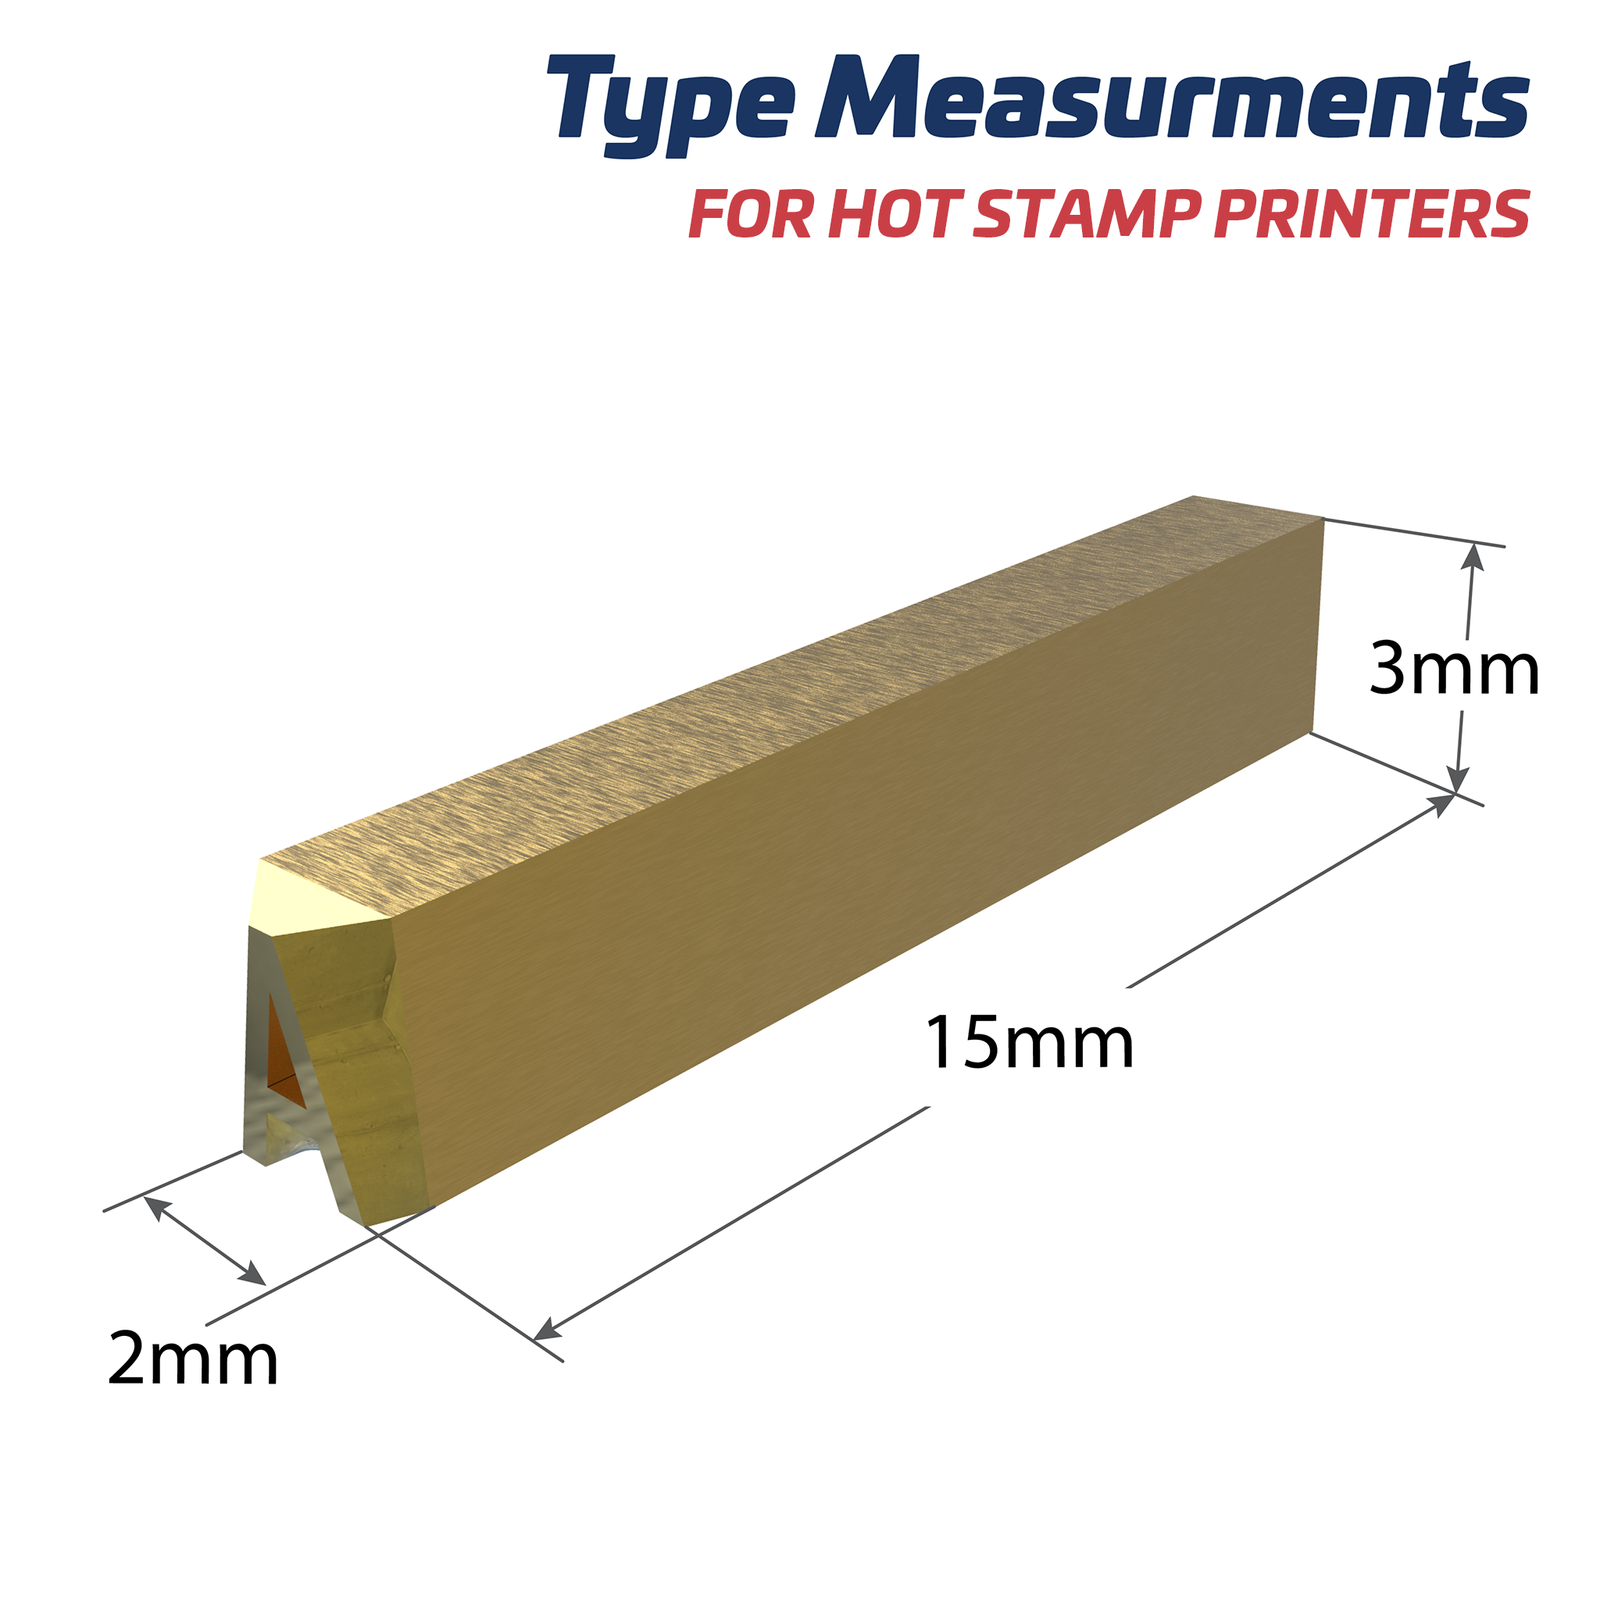 Measurements of the types for hot stamp printers: 2mm x 15mm x 3mm